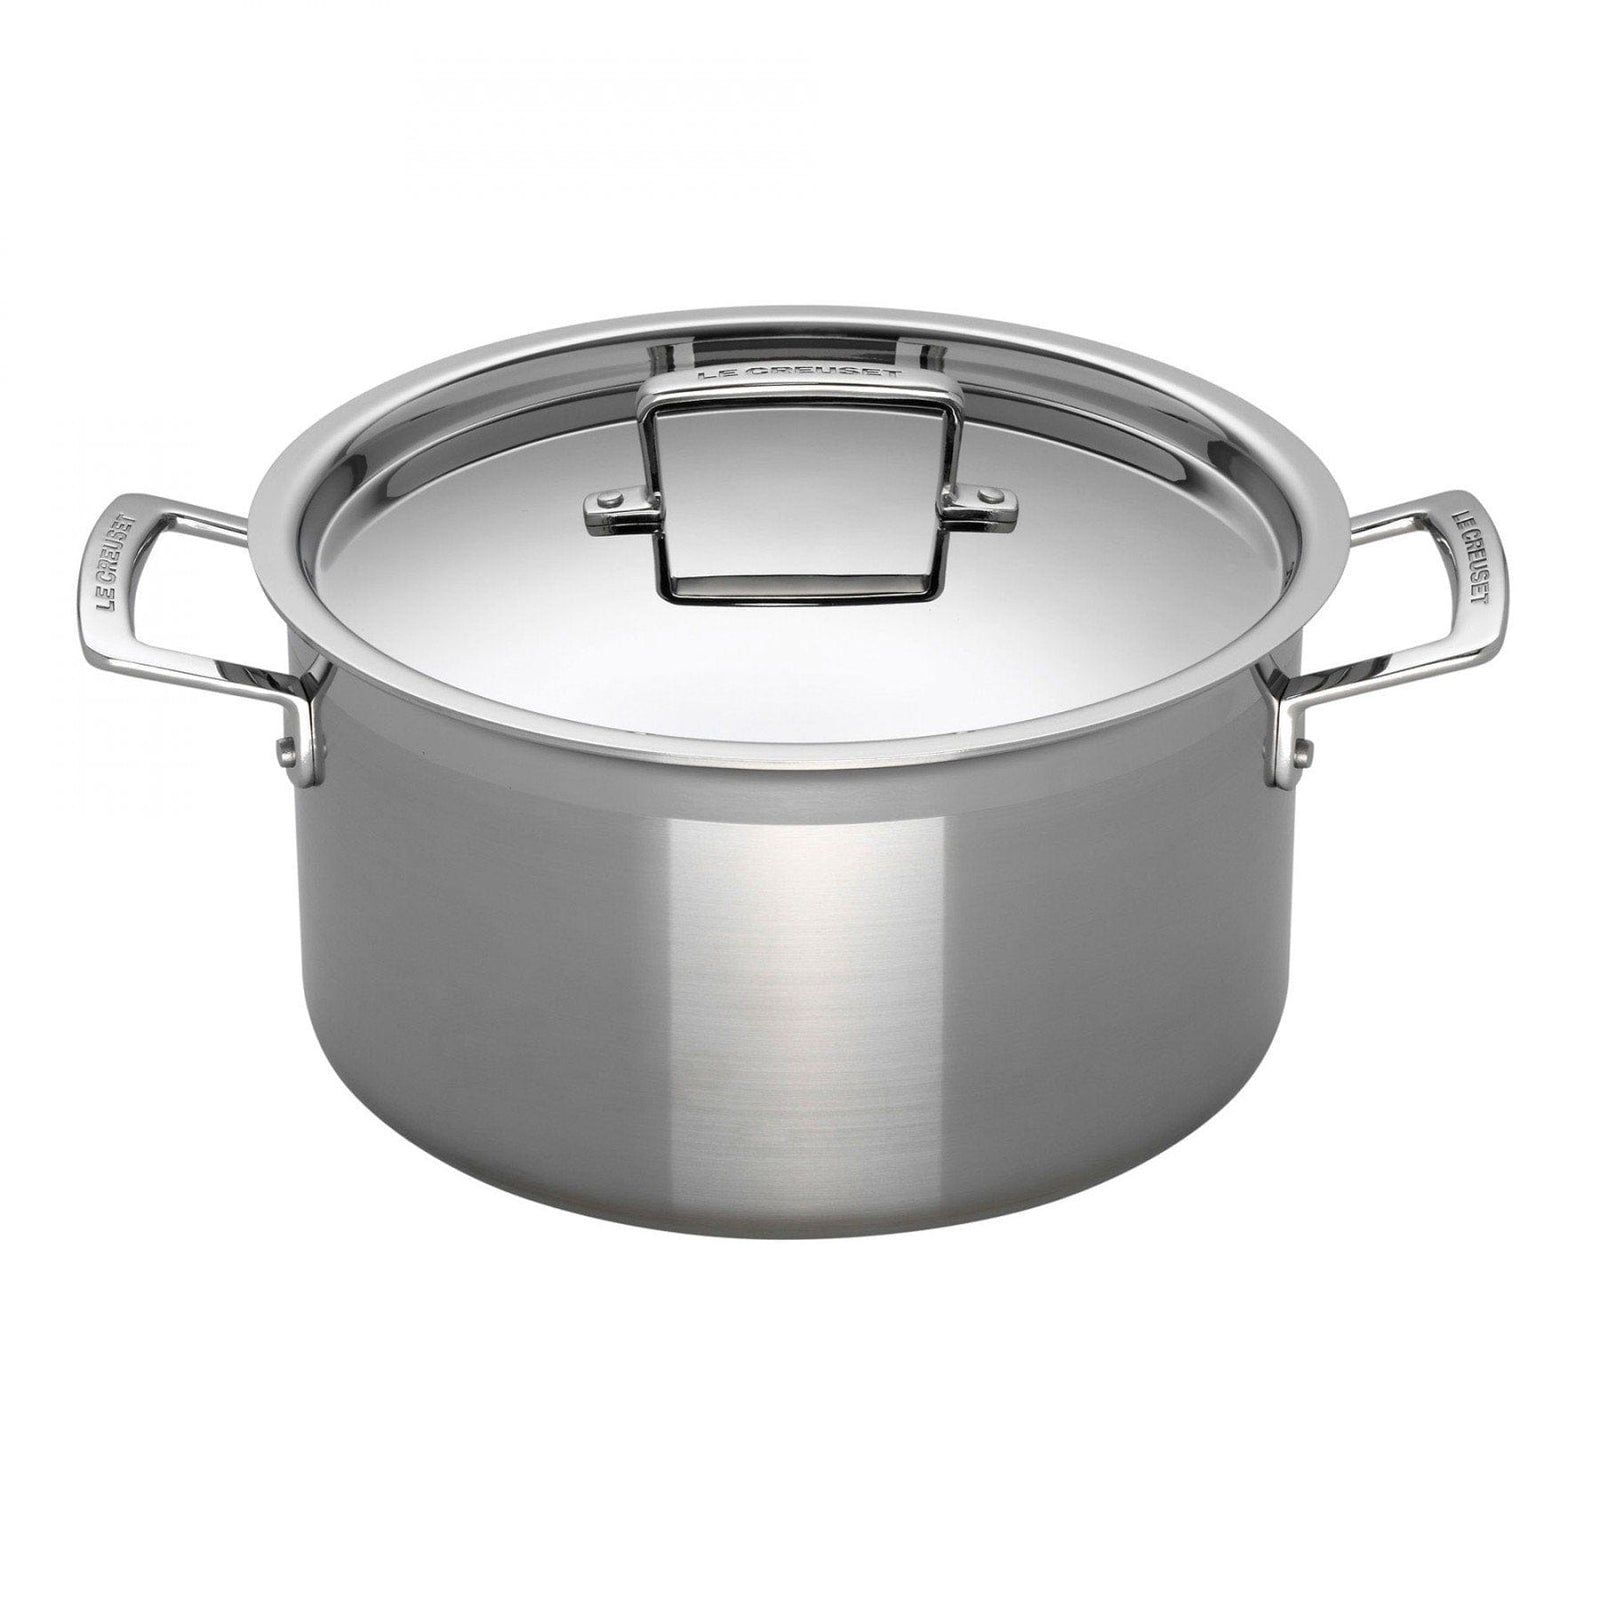 Le Creuset 3-PLY Stainless Steel Deep Casserole